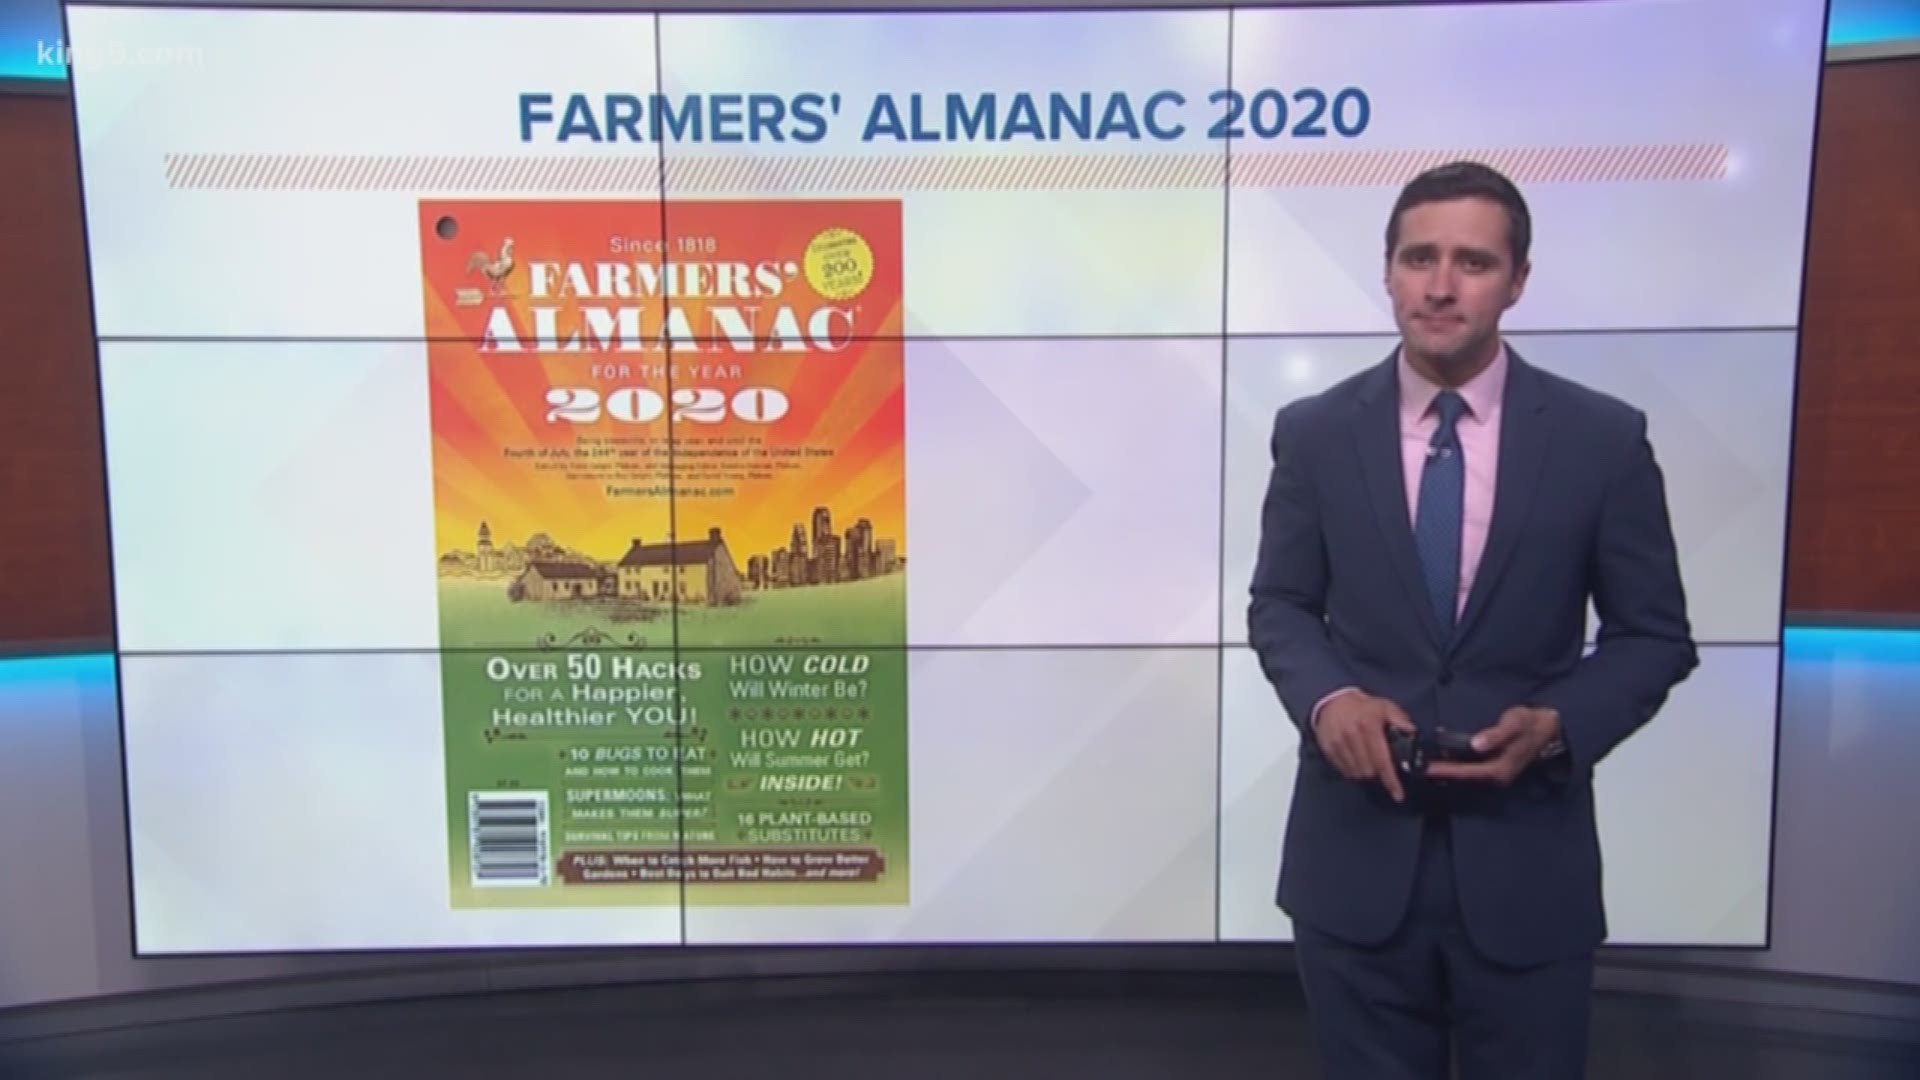 KING 5 Meteorologist Ben Dery explains why "The Farmers' Almanac" may not be the best place to get your winter forecast